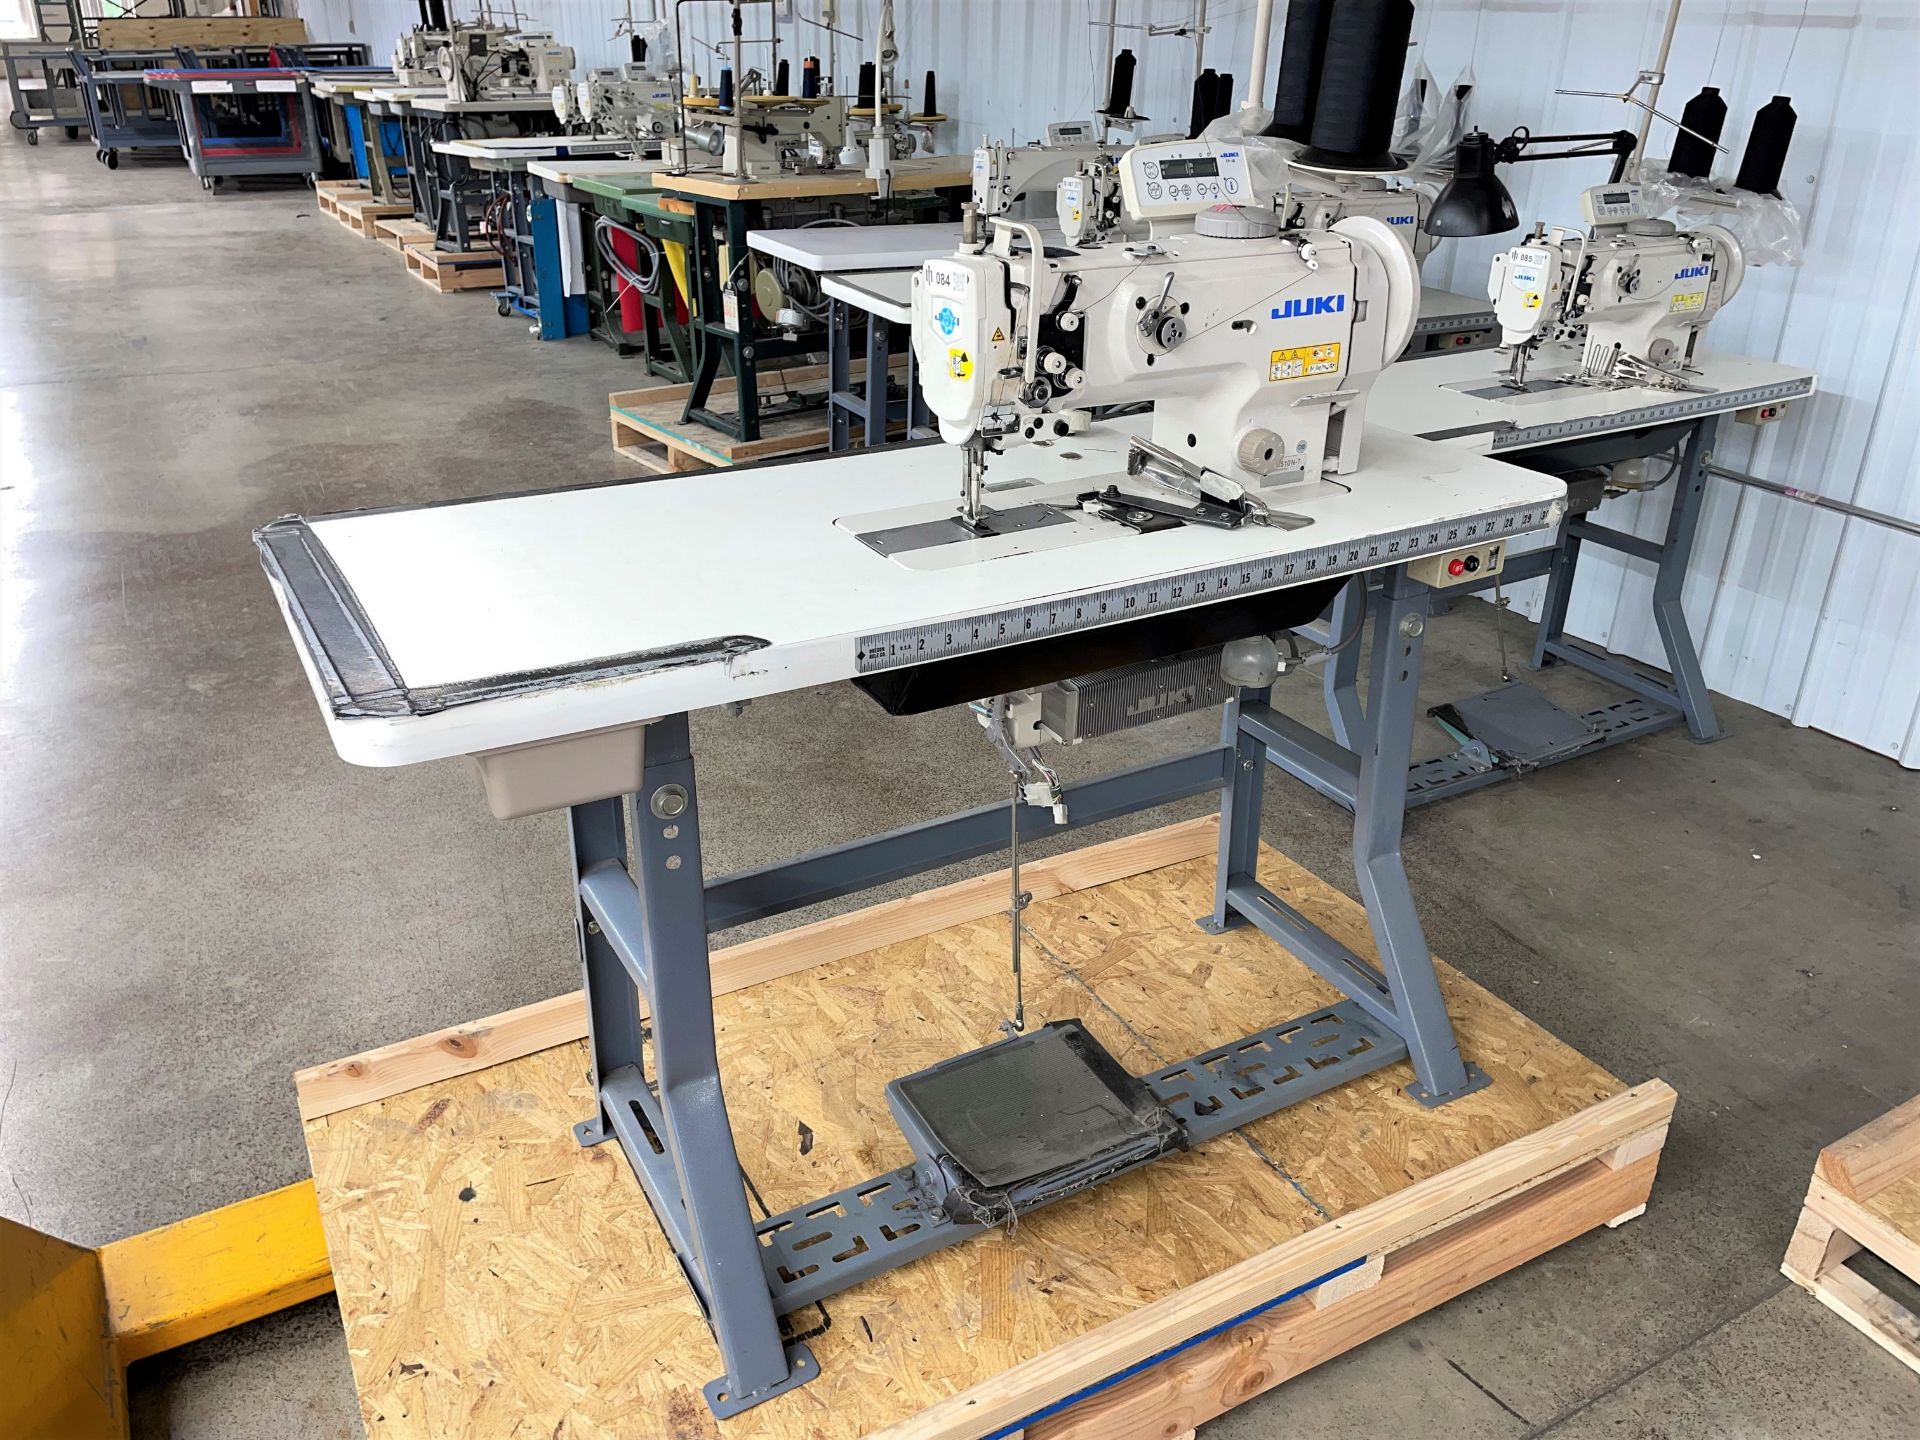 Juki Industrial Sewing Machine with Table - Image 11 of 11